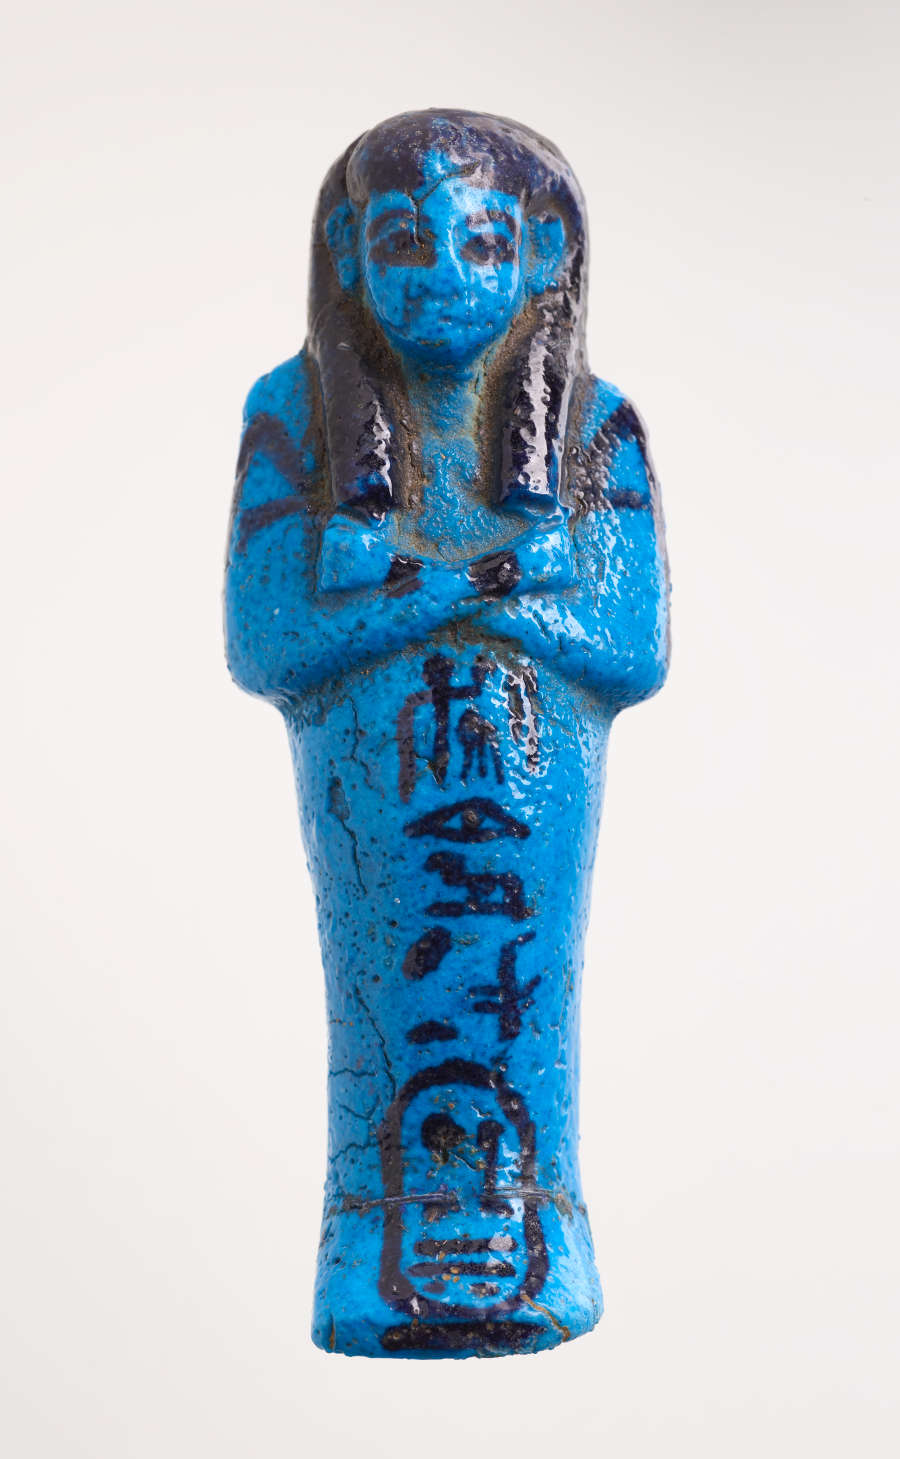 Front of a blue sculpture of a mummy-like figure with hands laid on its chest, with black detailing and hieroglyphic writing trailing down the length of its body laid horizontally.